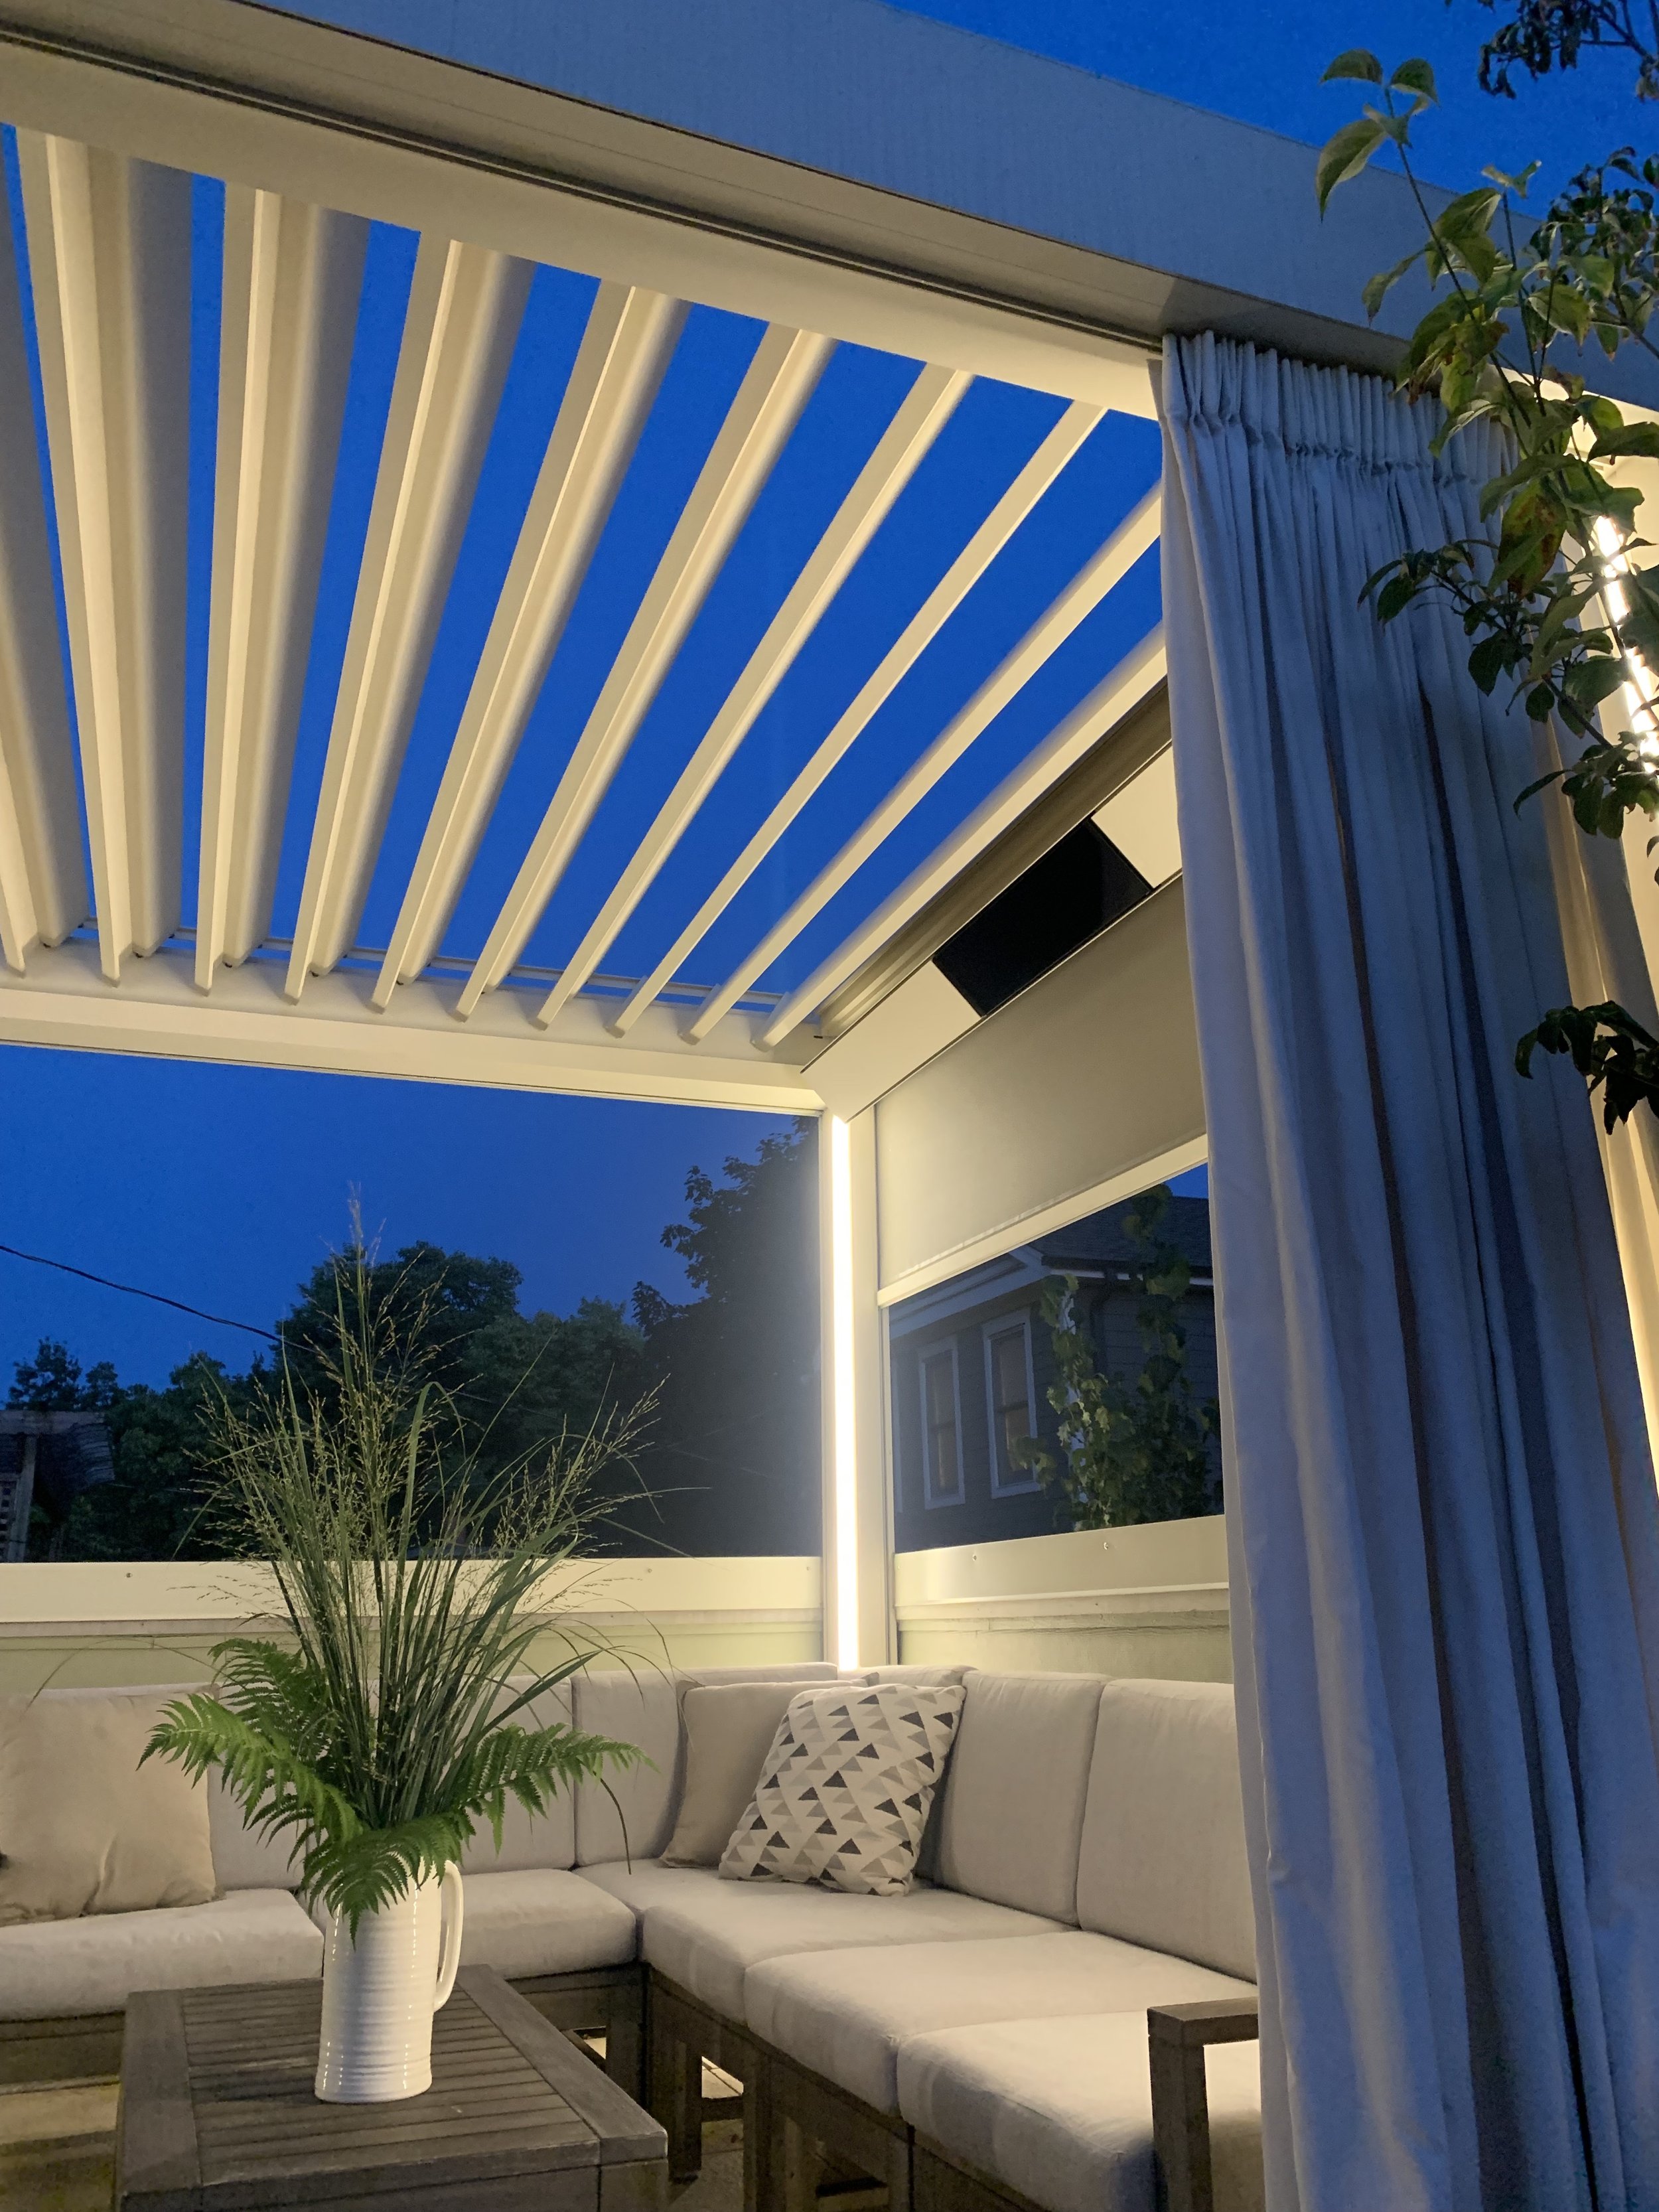 Rooftopia-chicago-lakeview-rooftop-deck-renson-louvered-pergola-luxury-outdoorliving2.jpg